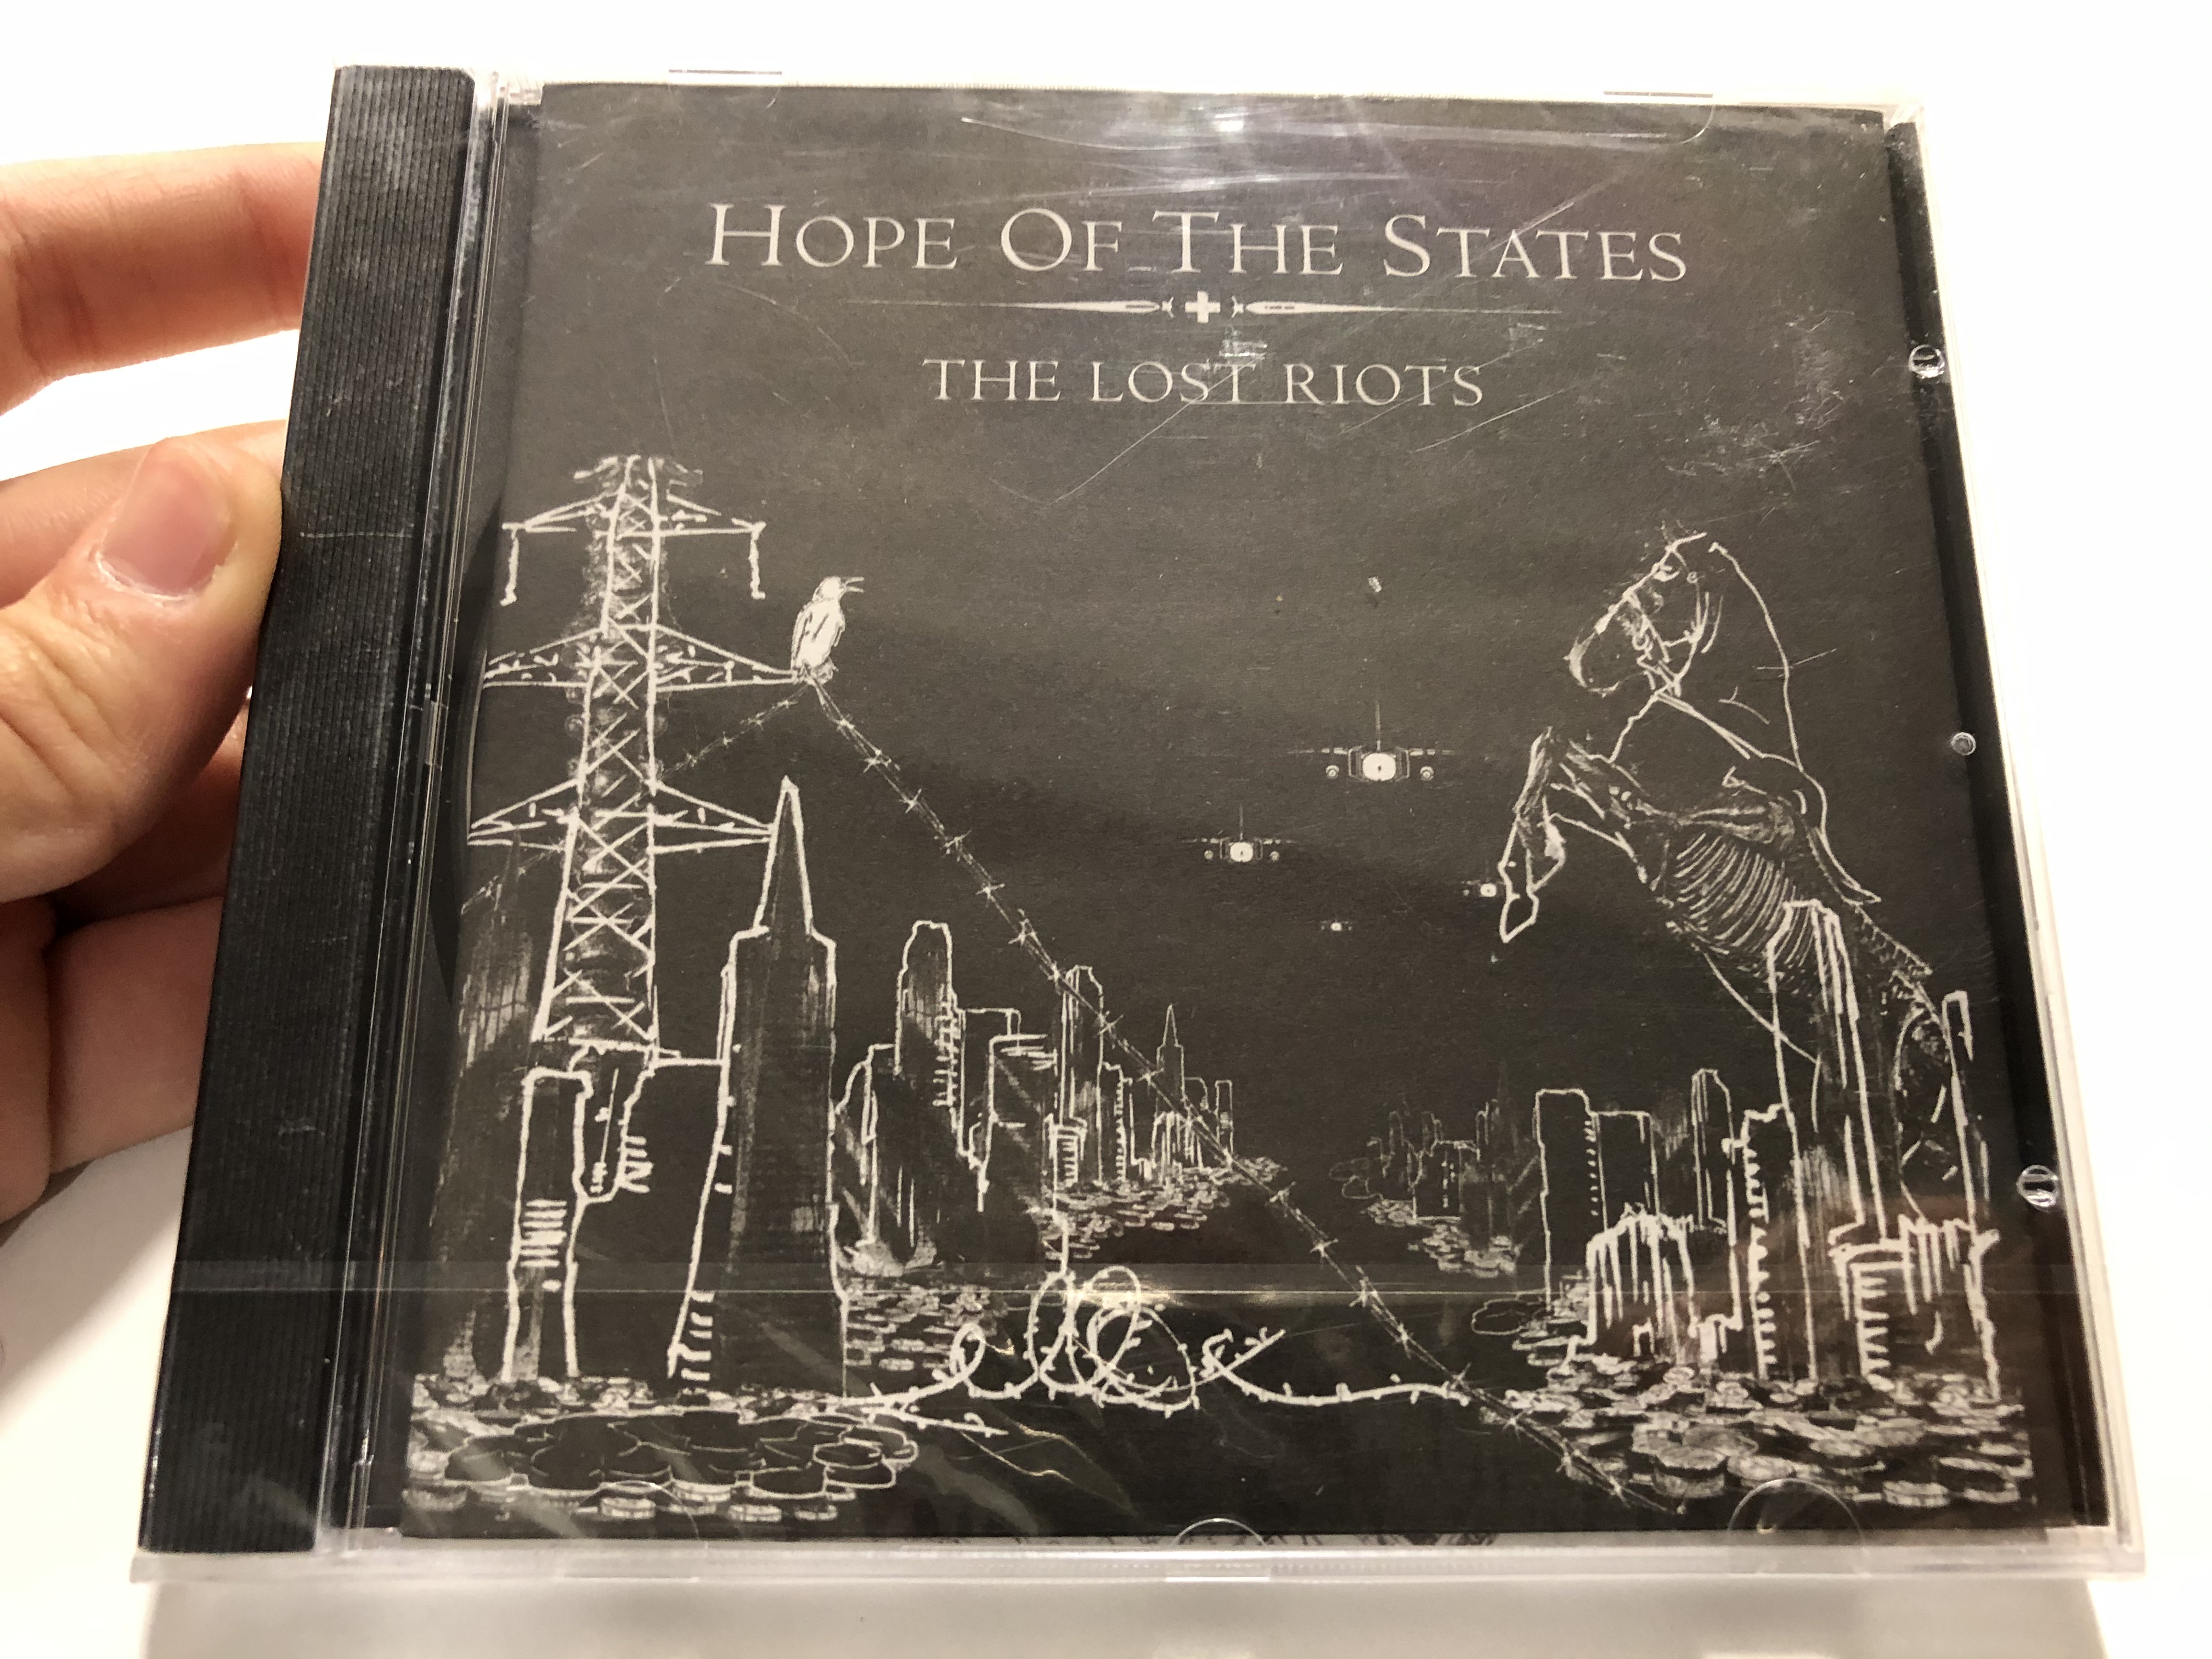 hope-of-the-states-the-lost-riots-sony-music-uk-audio-cd-2004-517264-5-1-.jpg